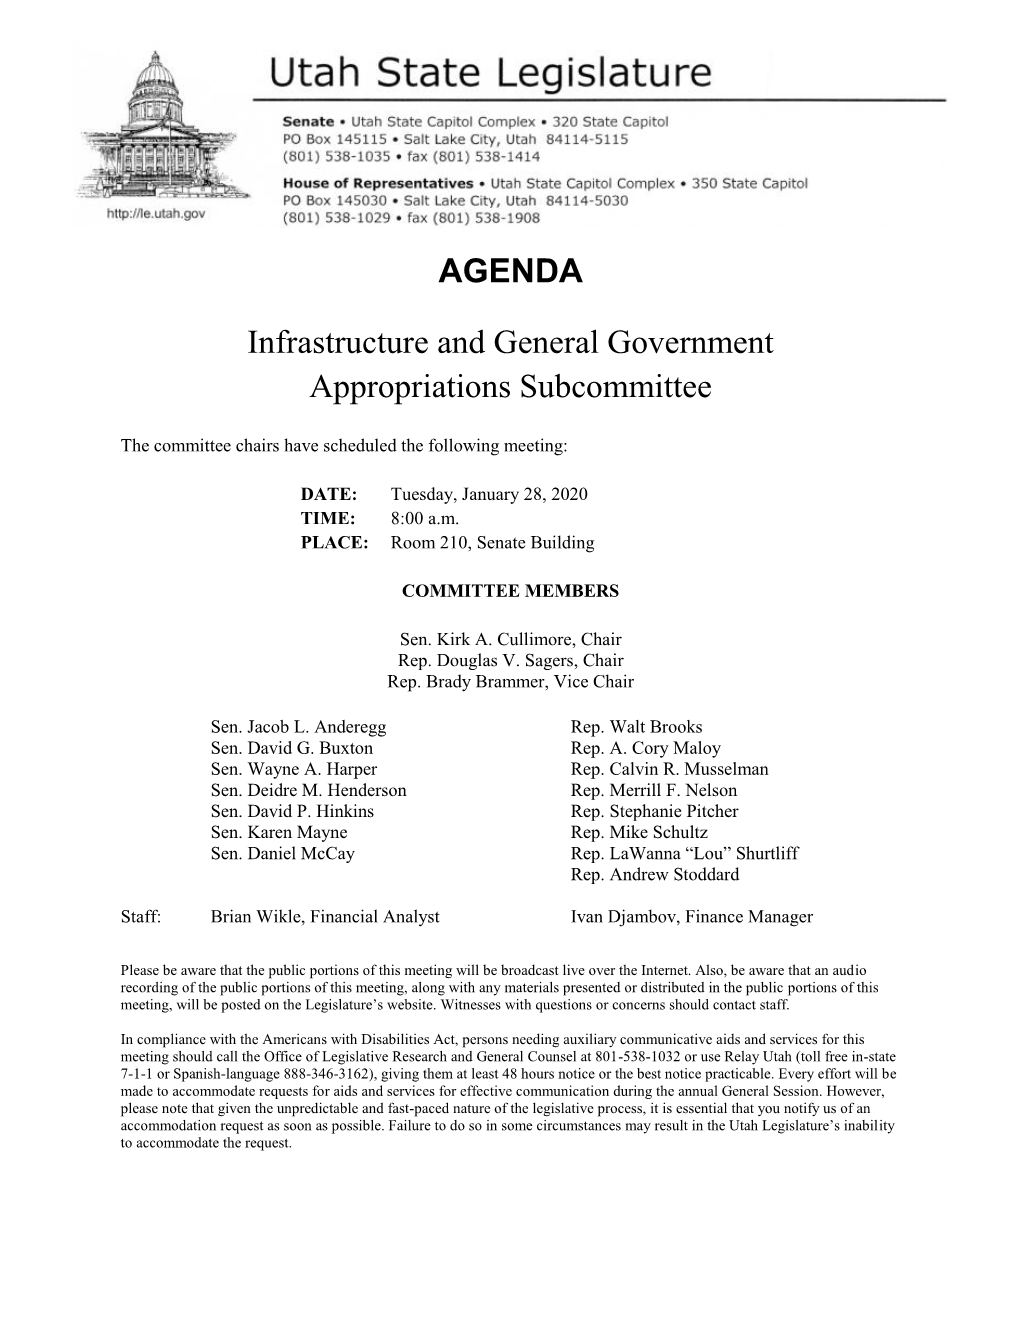 AGENDA Infrastructure and General Government Appropriations Subcommittee Tuesday, January 28, 2020, 8:00 A.M